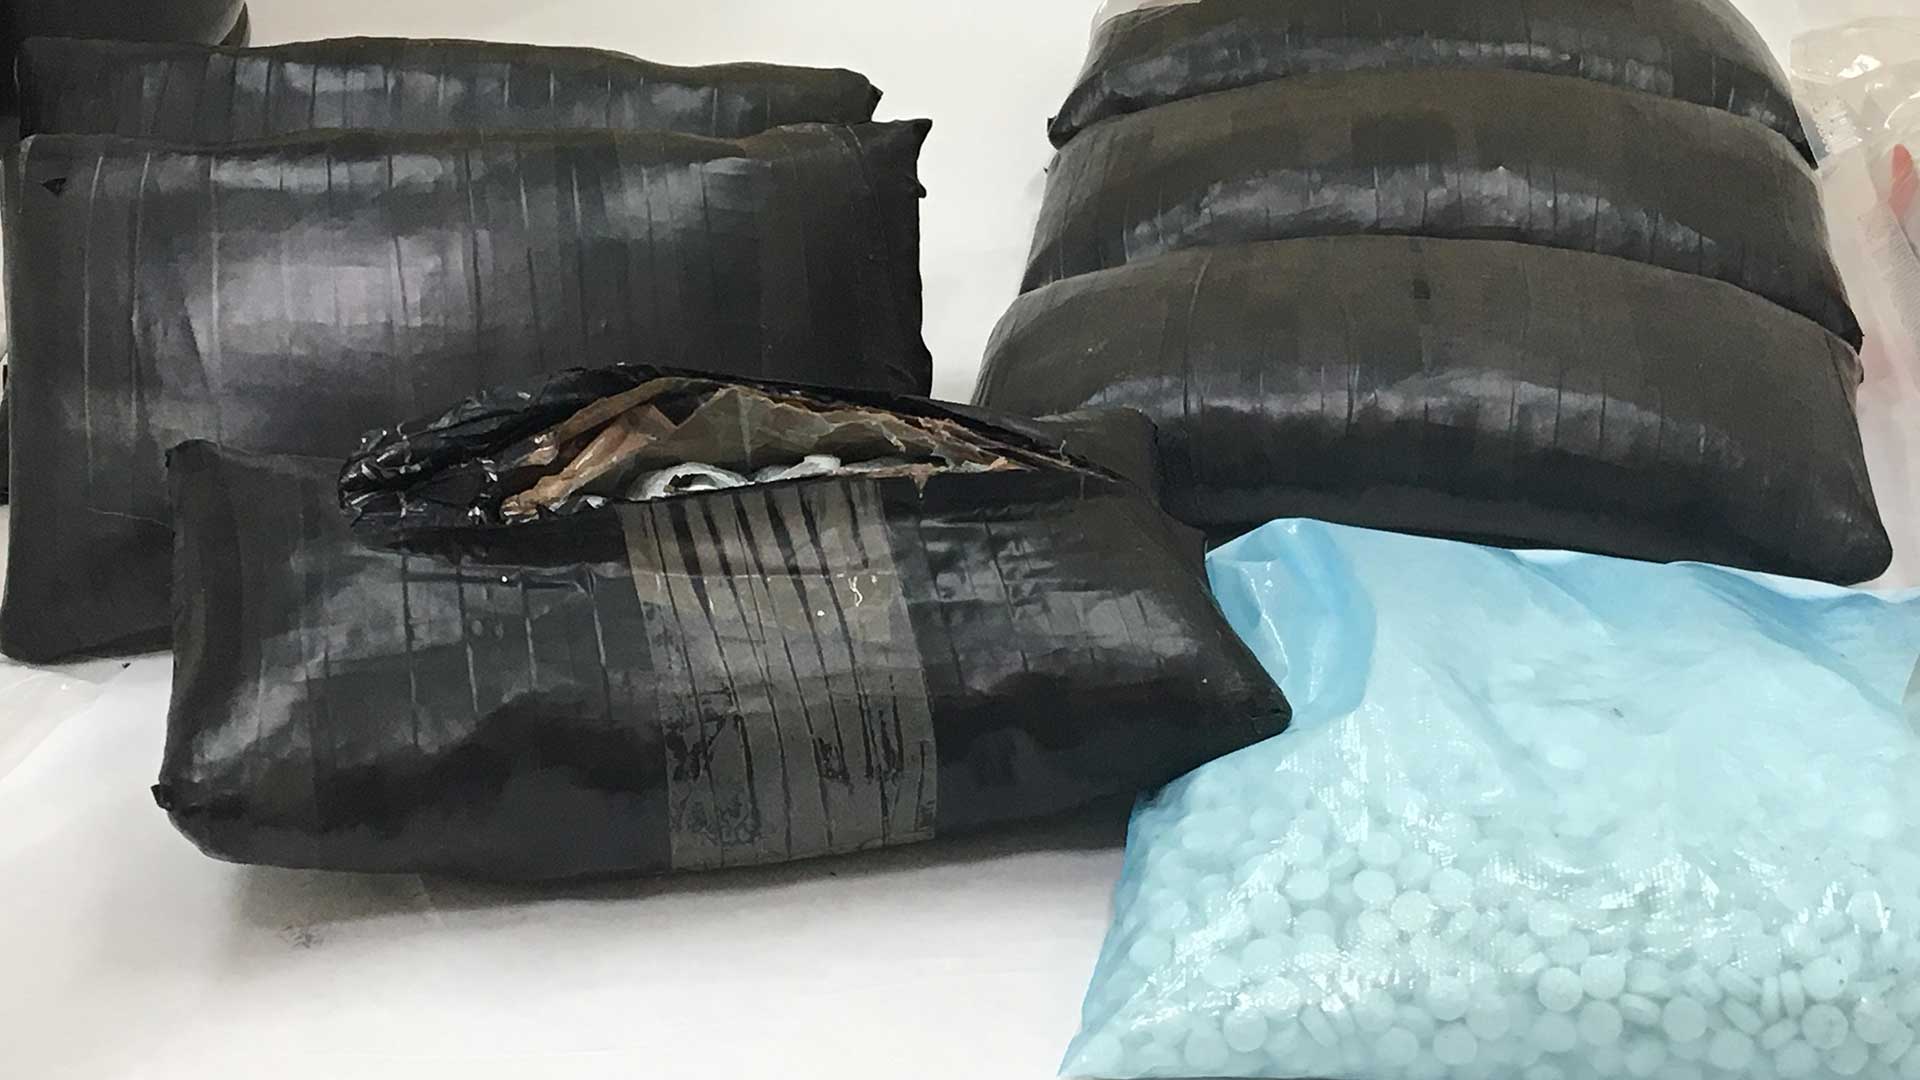 DEA photo of a reported 90,000 fentanyl pills, published Aug. 22, 2019.